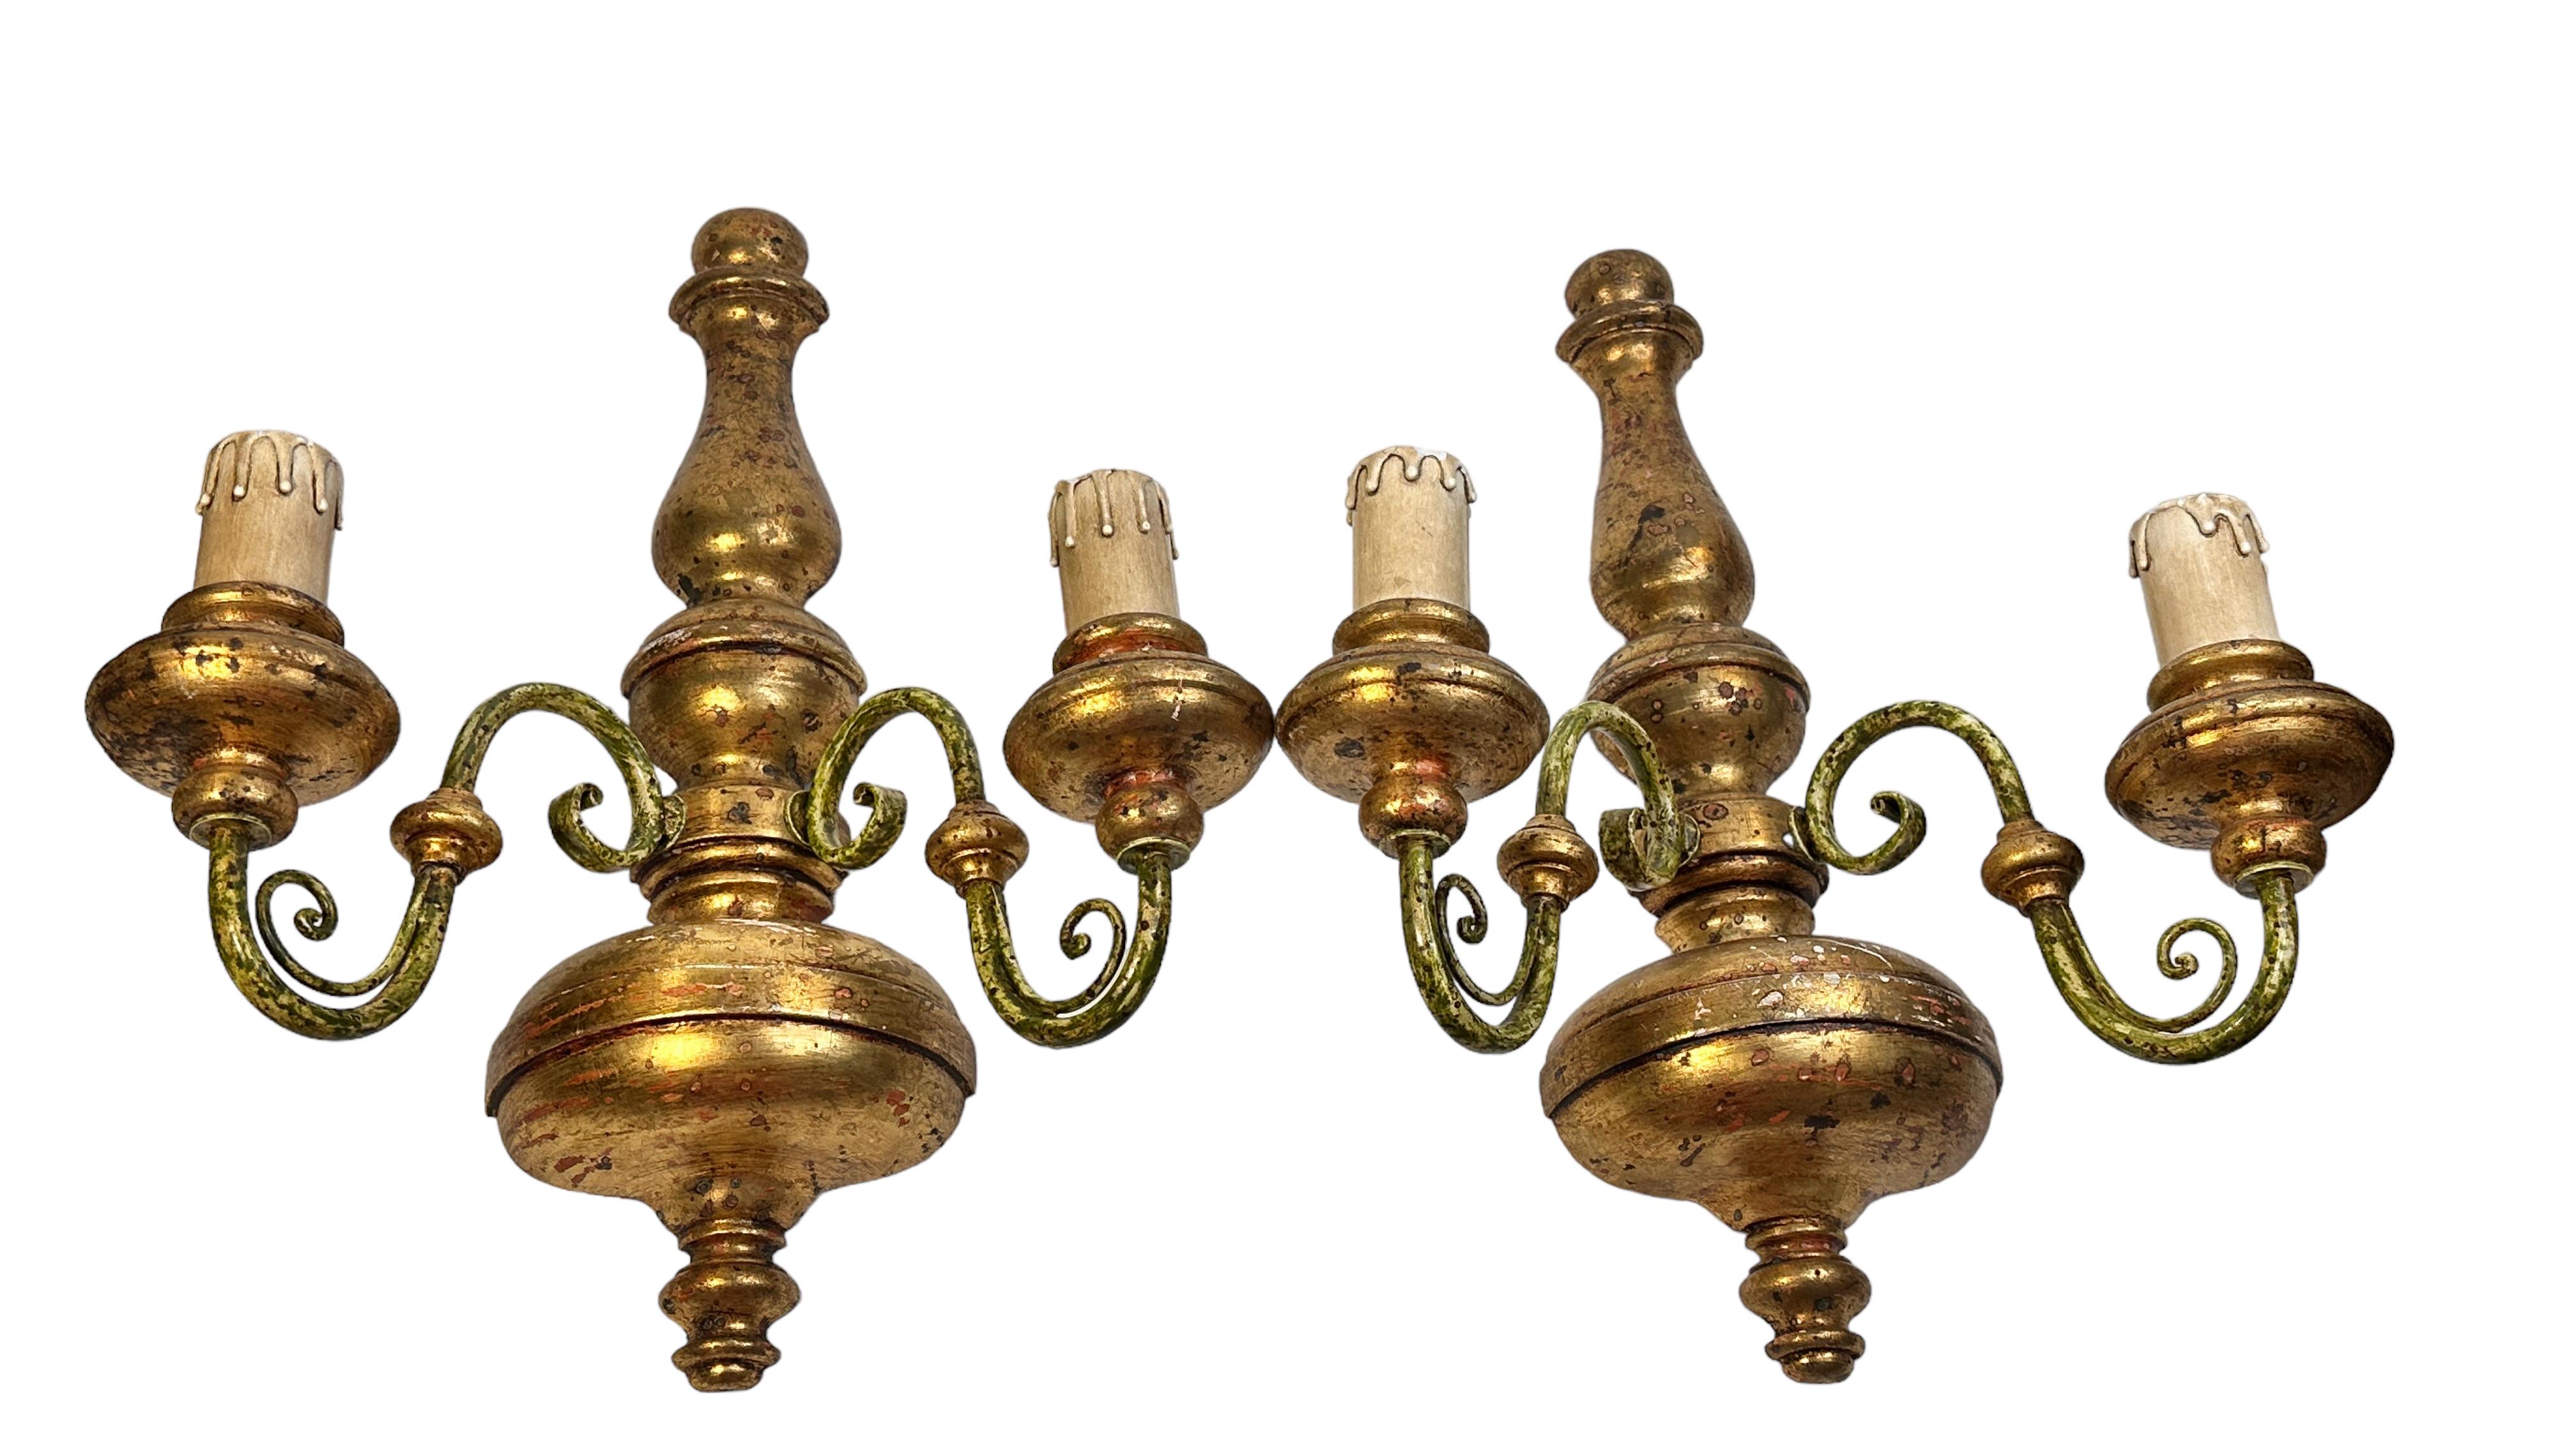 A pair of metal and wood sconce. Each fixture requires two European E14 candelabra bulbs, each bulb up to 40 watts. The wall light has a beautiful color and gives each room an eclectic statement. Light bulbs are not included in this offer. A nice